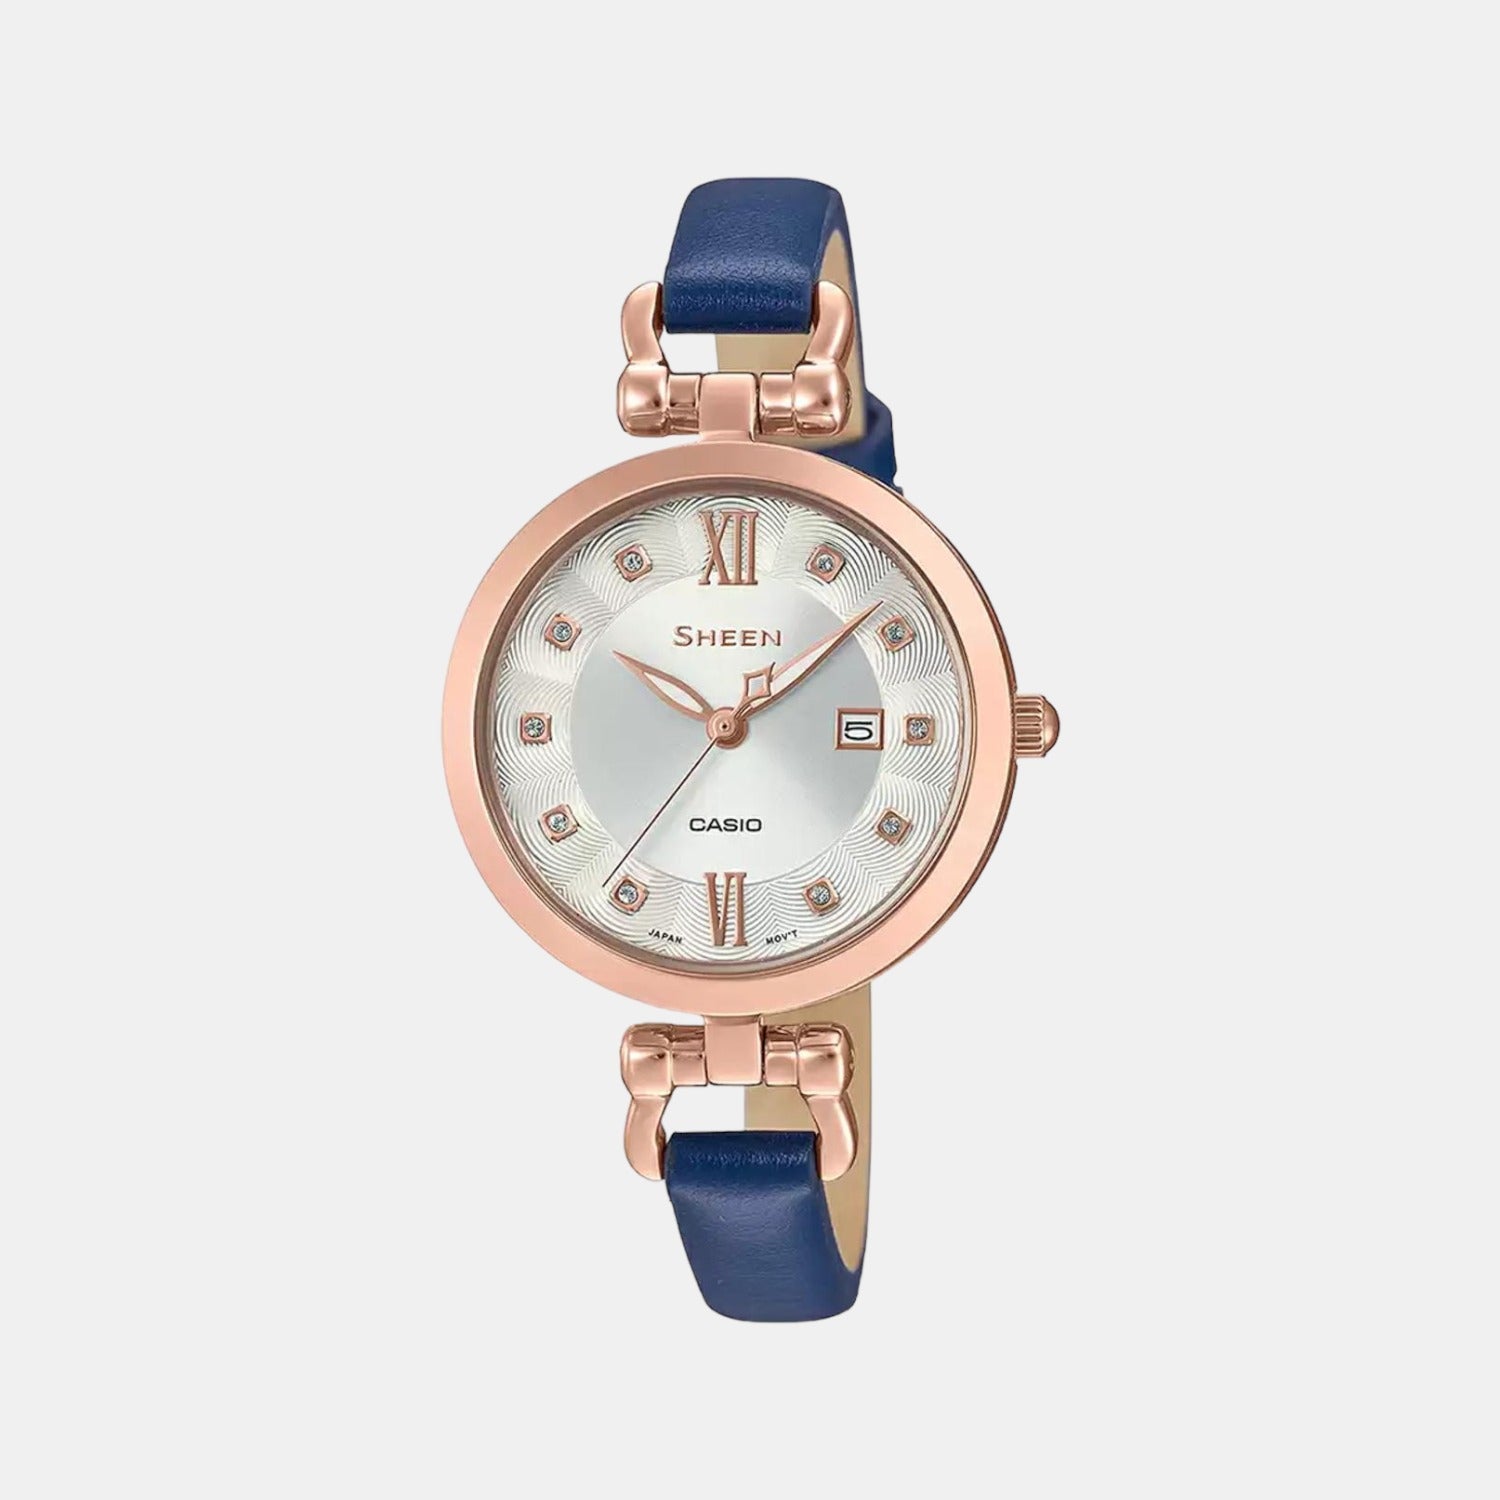 Casio to Release SHEEN Watches for Women with Lustrous Mother of Pearl Dials